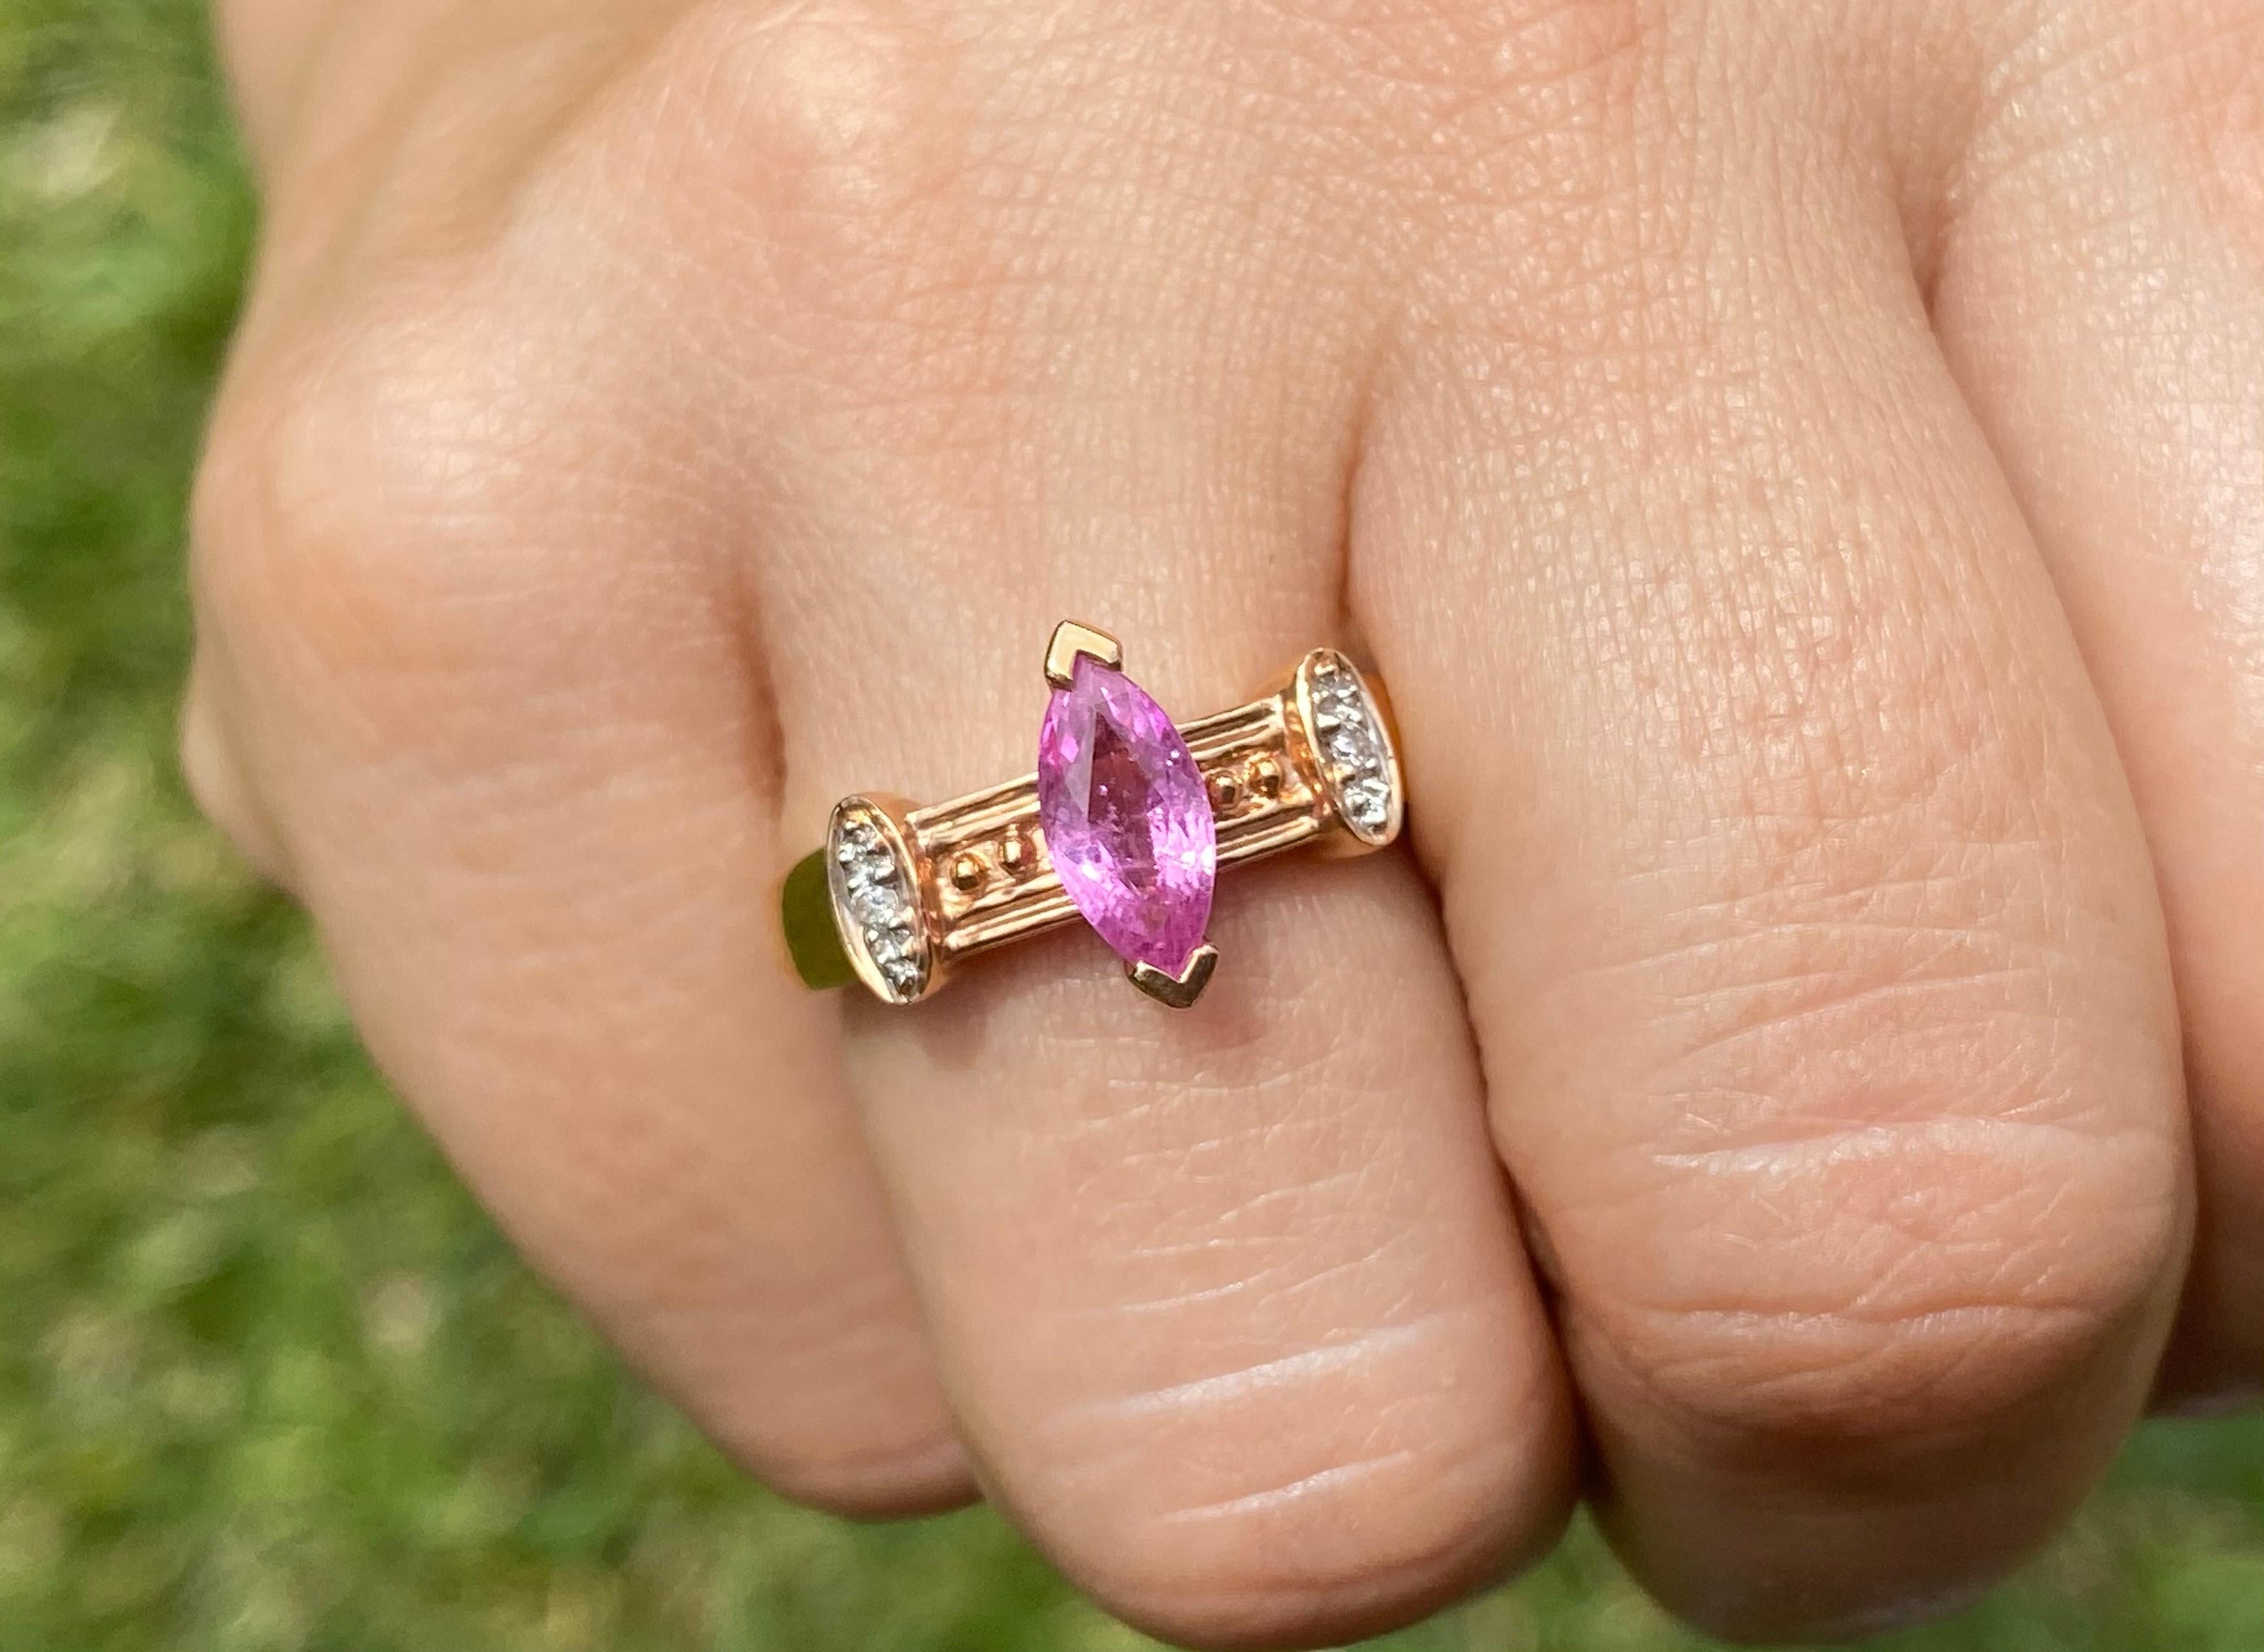 Marquise cut natural pink Sapphire adorned with natural white diamond side-stones. Gemstones are mounted in textured 14k rose gold royal retro style setting. The center stone Sapphire has flawless clarity and refracts deep bright pink color hues.